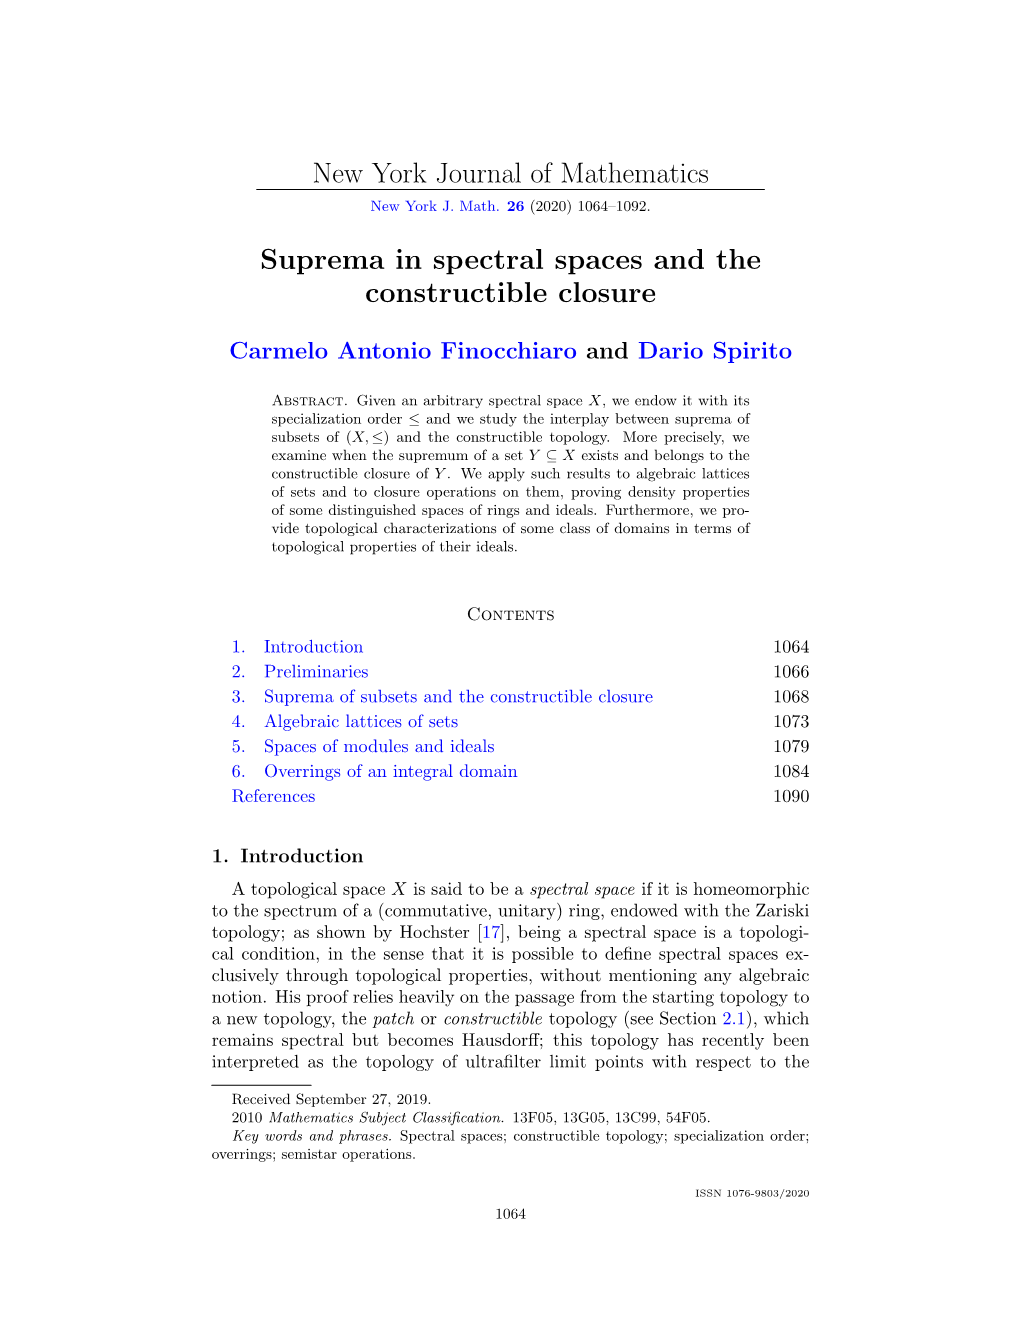 New York Journal of Mathematics Suprema in Spectral Spaces and The